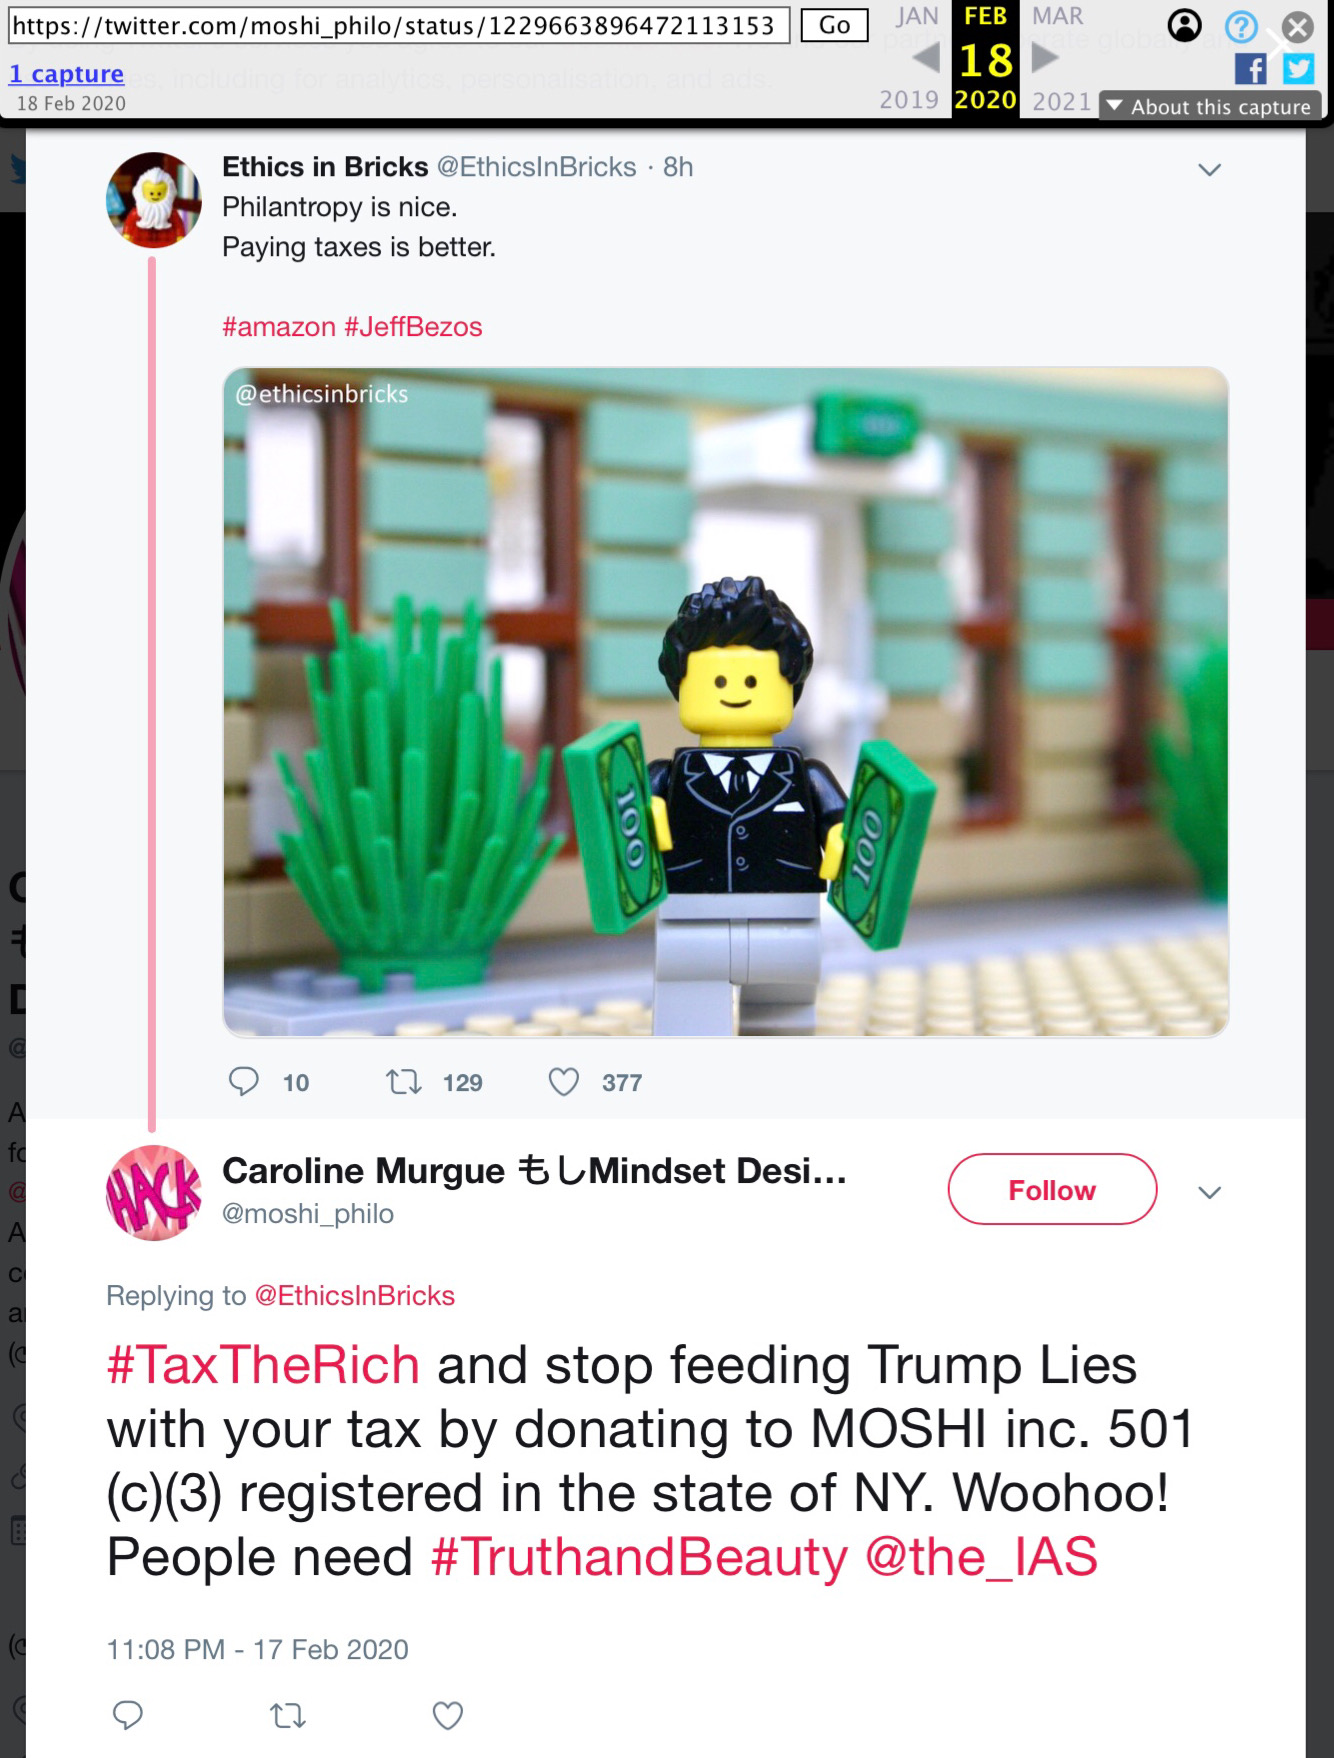 17 Feb 2020 tweet from @moshi_philo: #TaxTheRich and stop feeding Trump Lies with your tax by donating to Moshi Inc. 501 (c)(3) registered in the state of NY> Woohoo! People need #TruthandBeauty @the_IAS